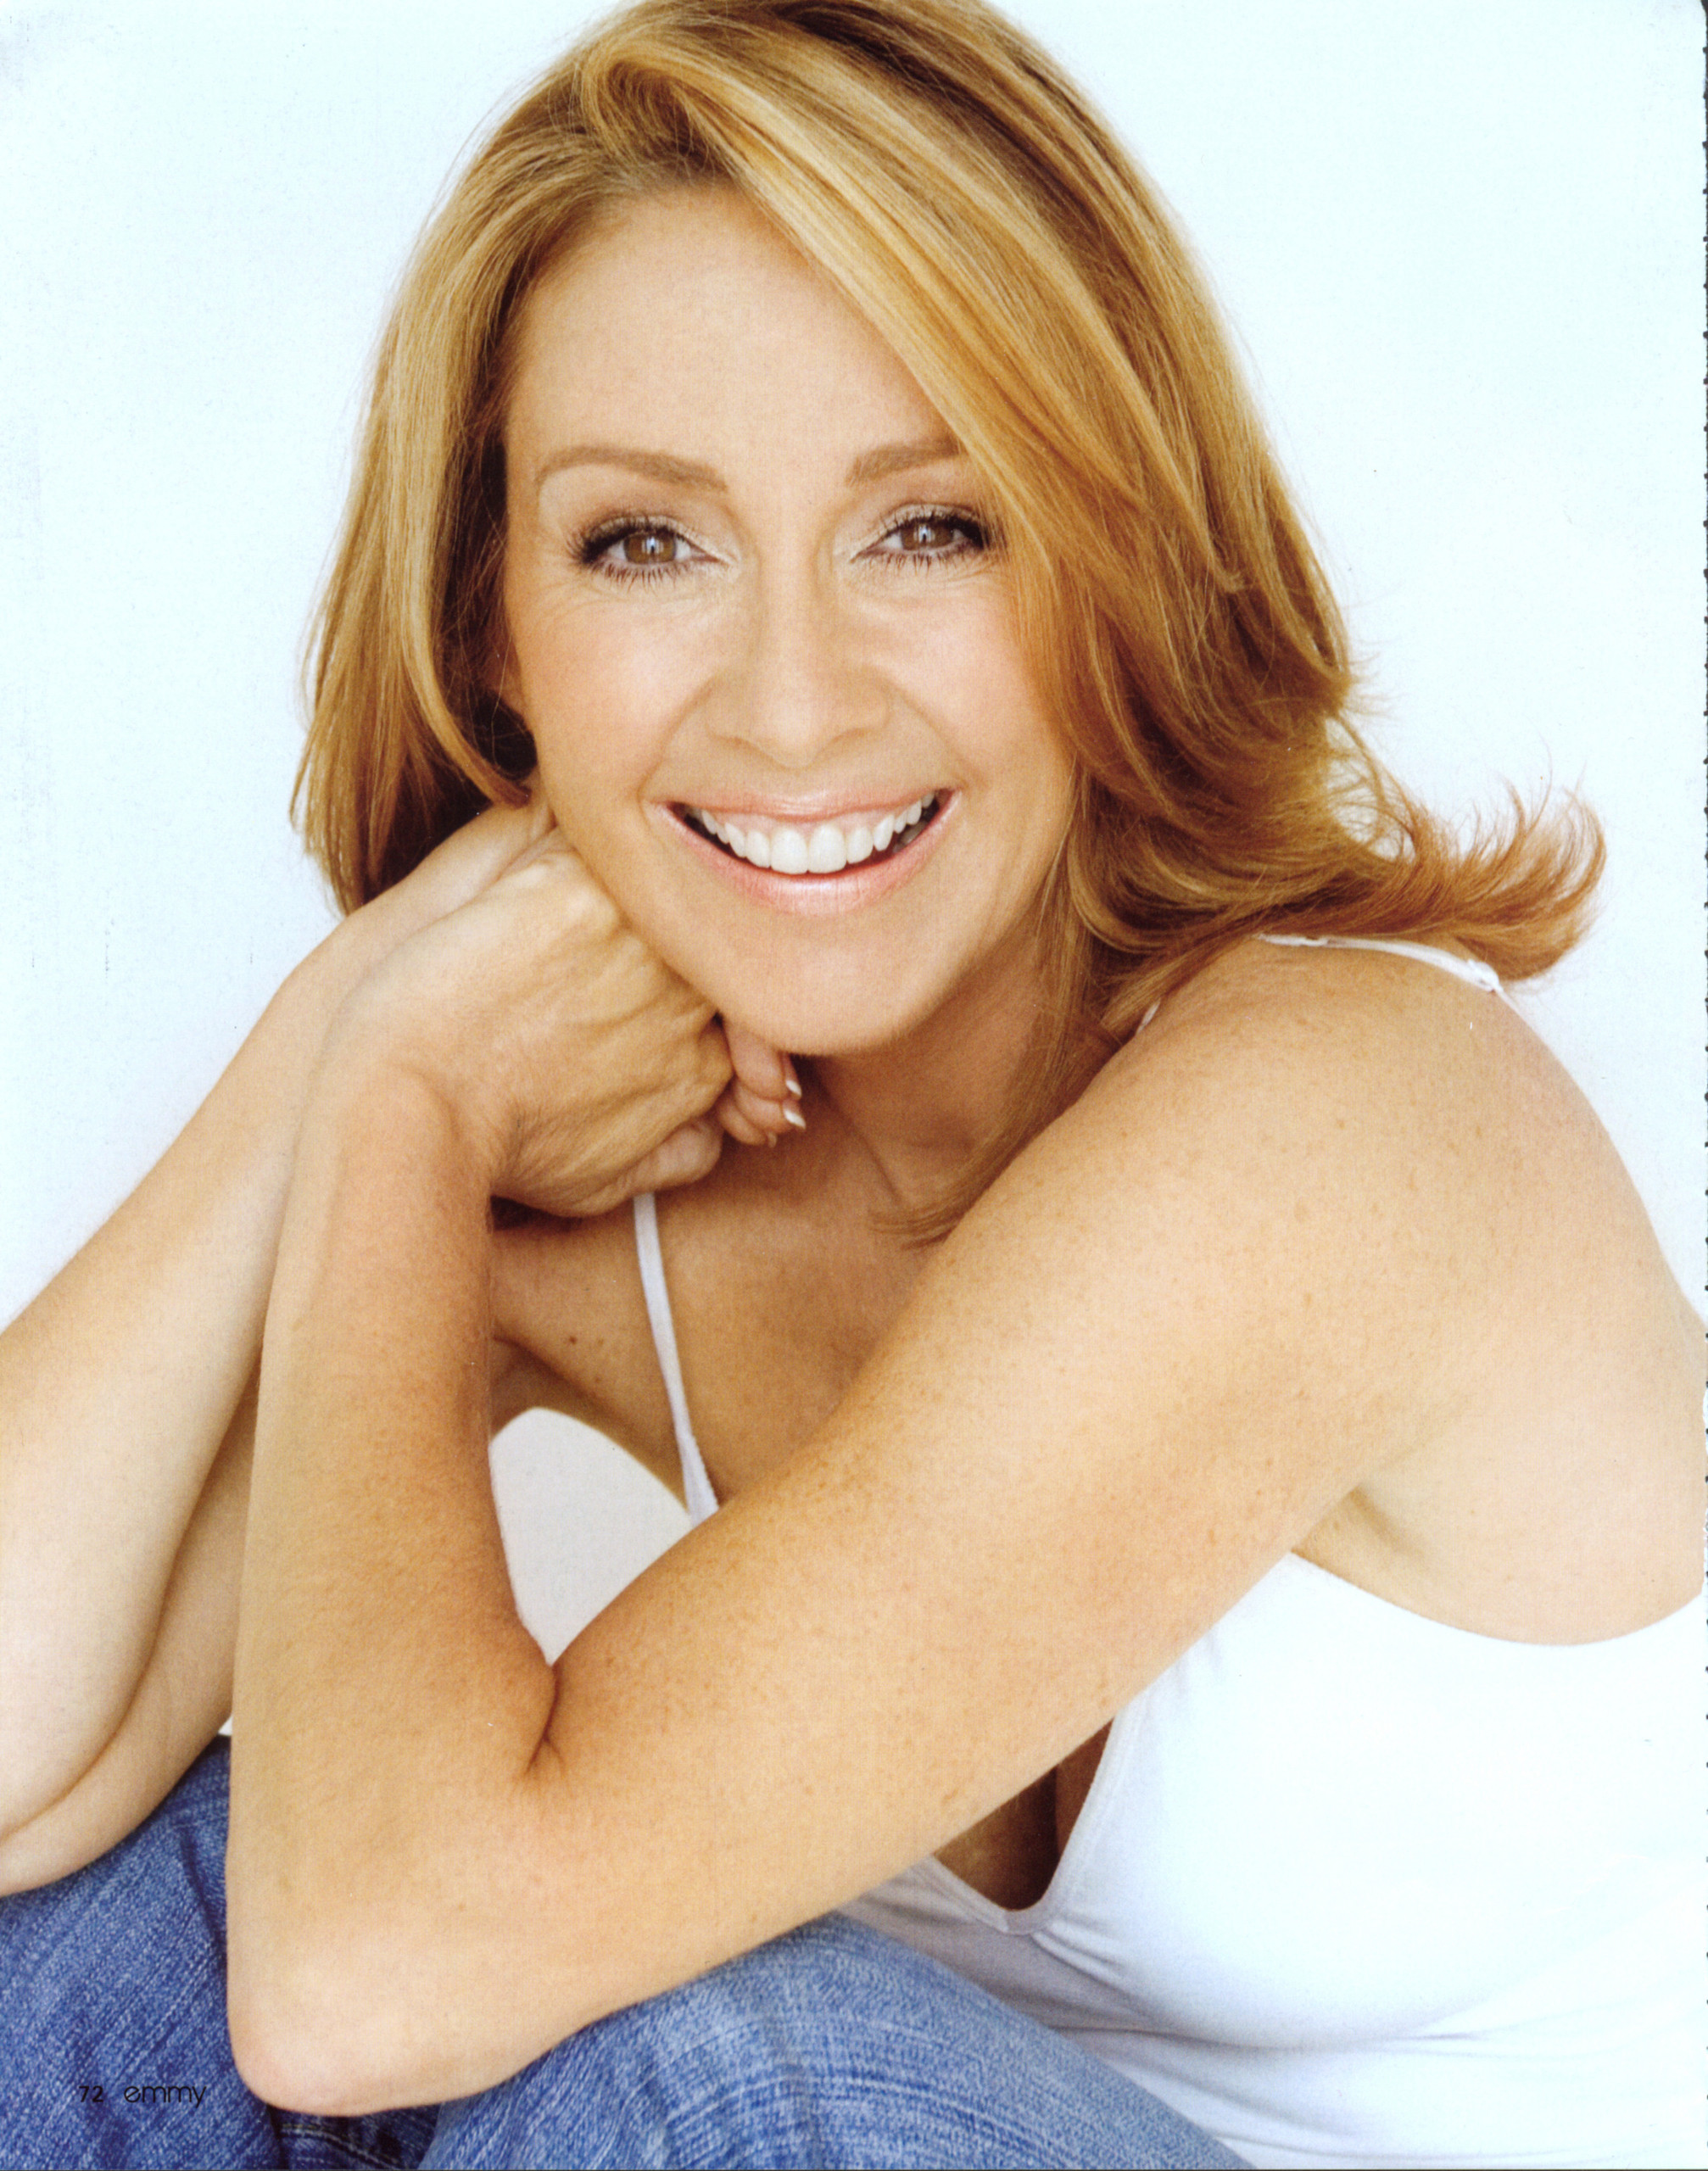 2014x2560 Pin Patricia Heaton Page 2 Images on Pinterest